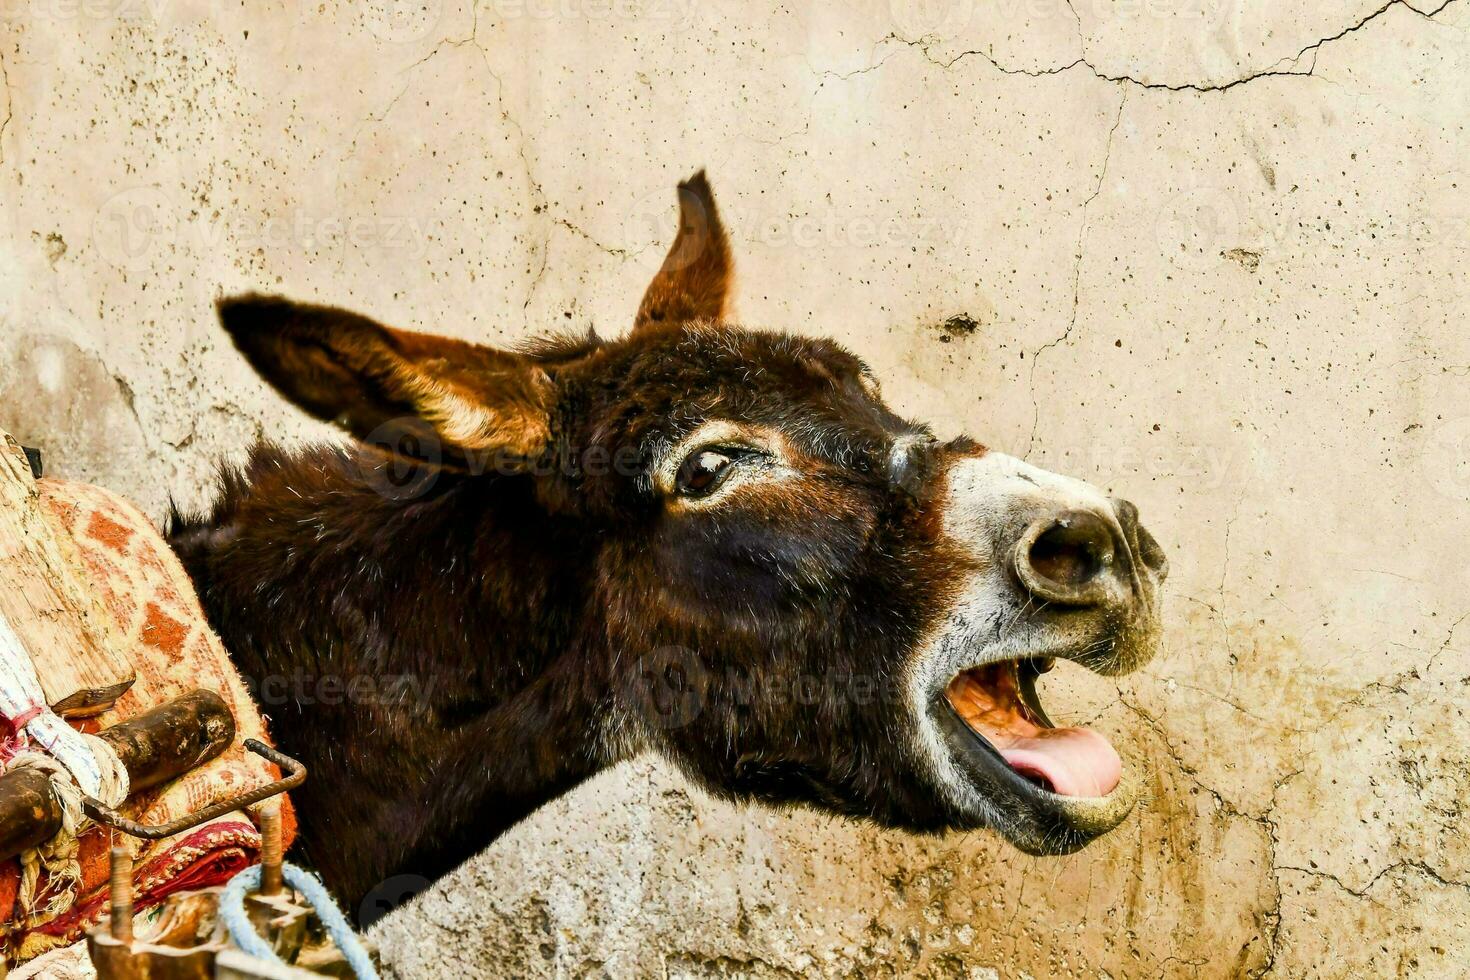 a donkey with its mouth open photo